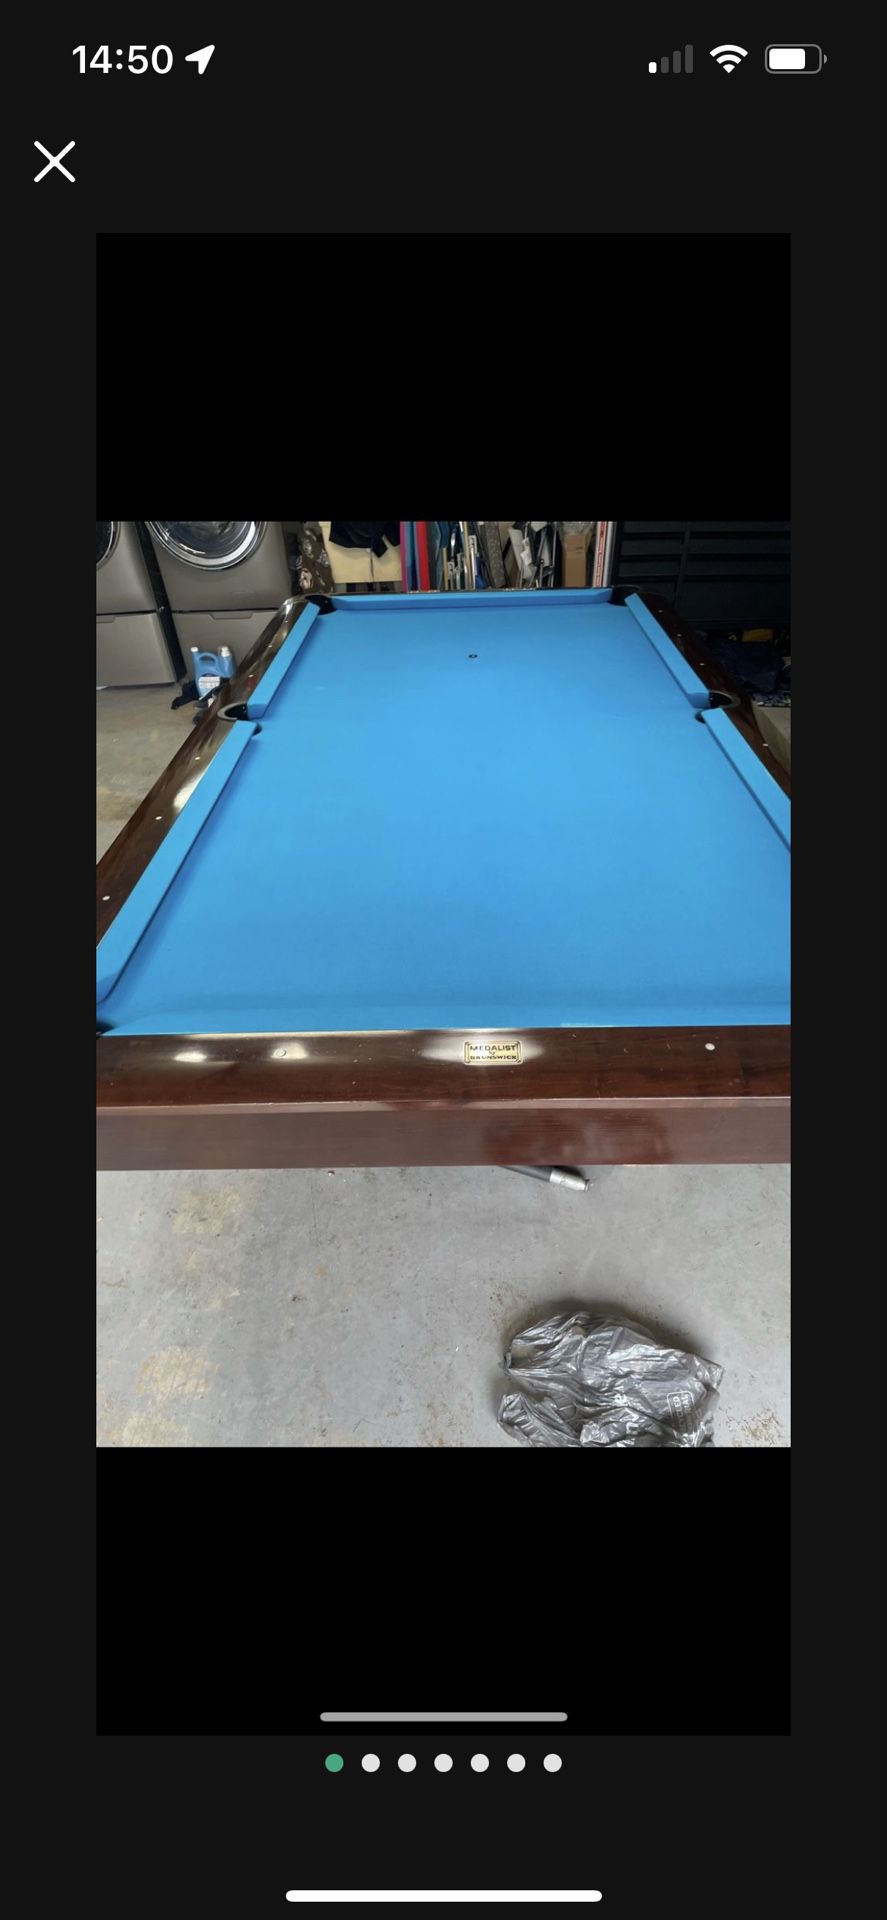 Medalist pool table by Brunswick